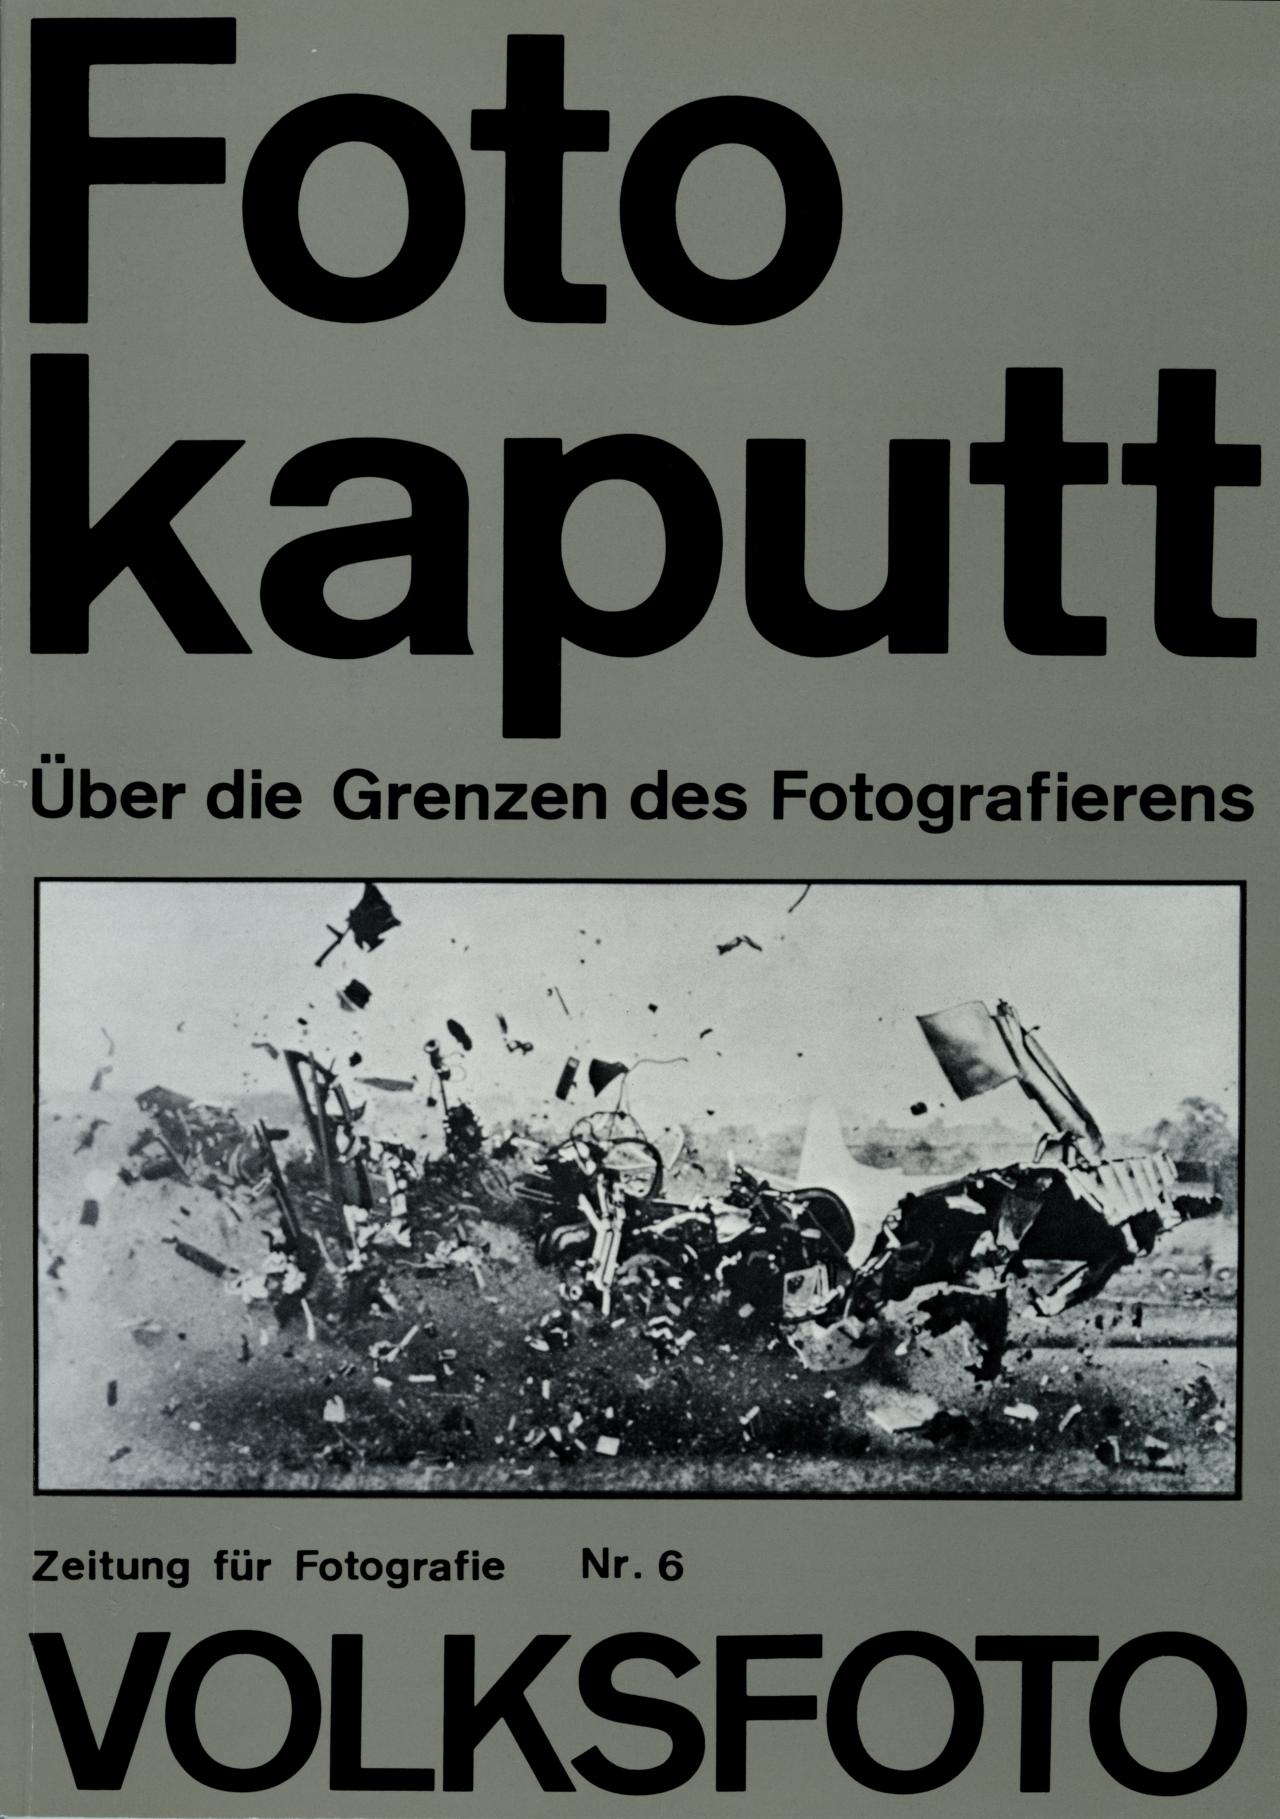 Andreas Seltzer and Dieter Hacker (ed.), folk photo. Newspaper for photography. On the Borders of Photography, No. 6, 7th Produzentengalerie, Berlin, 1980.